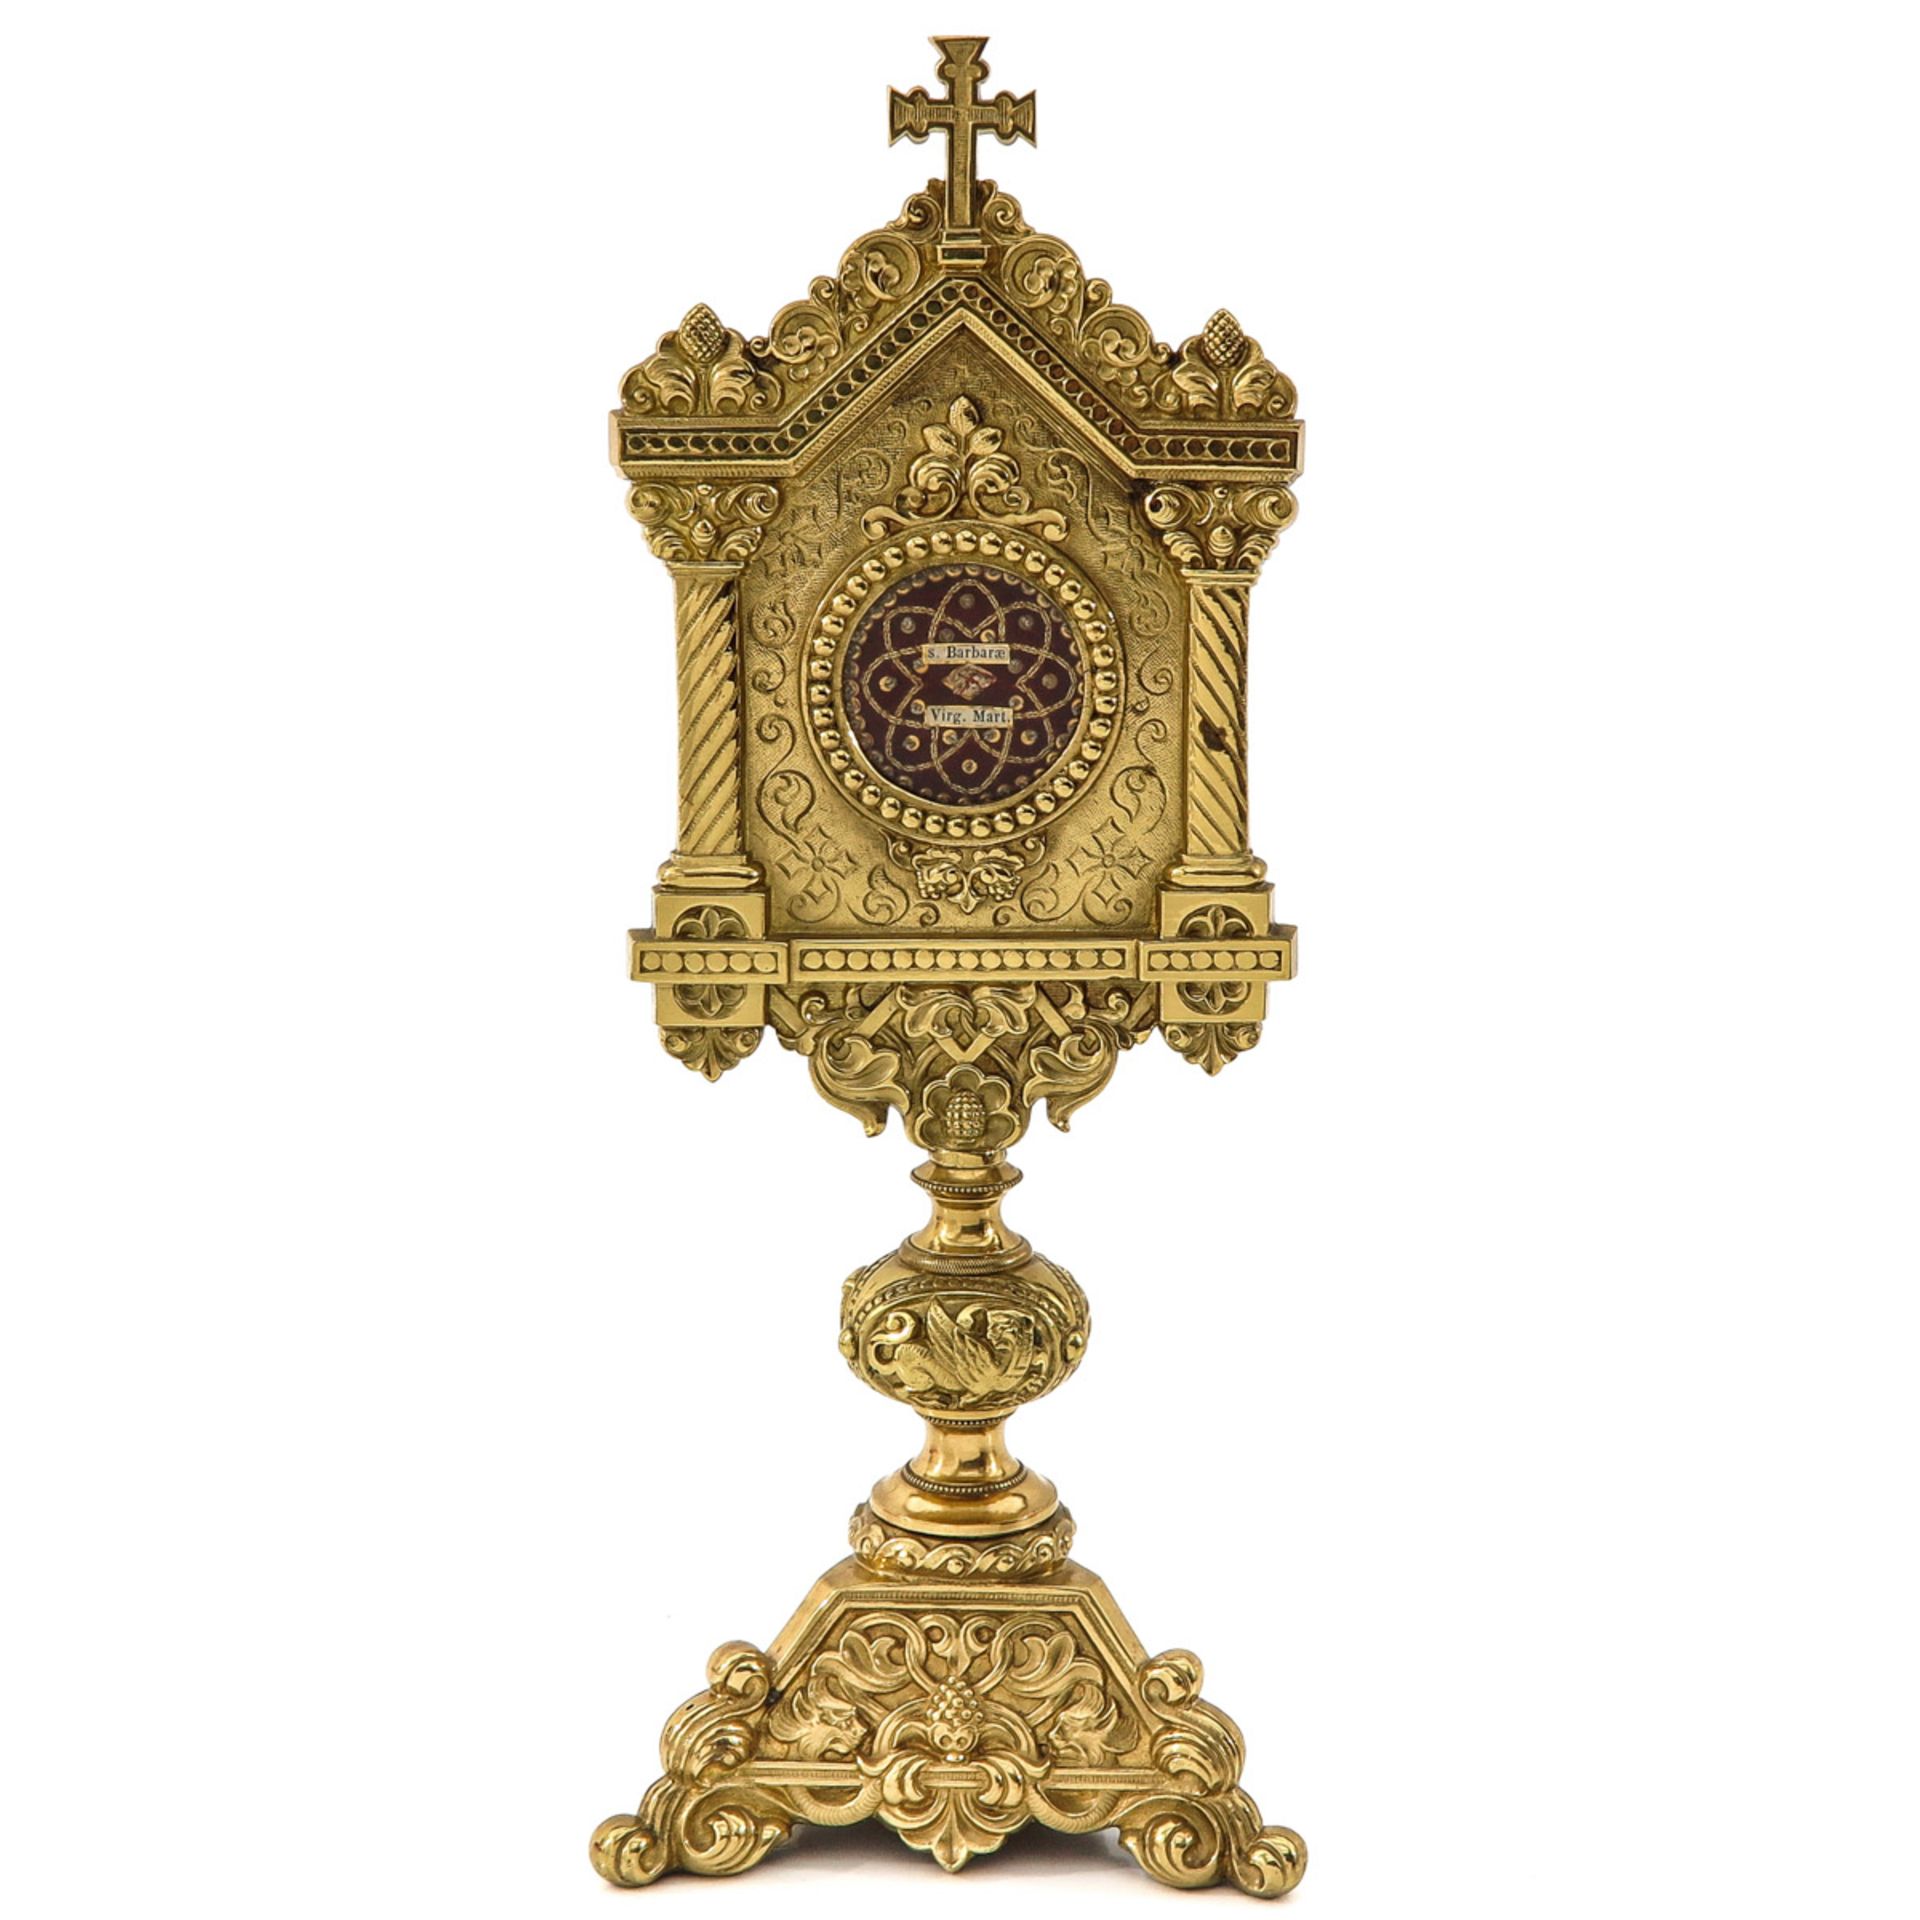 A Gilded Relic Holder with Relic from Saint Barbara